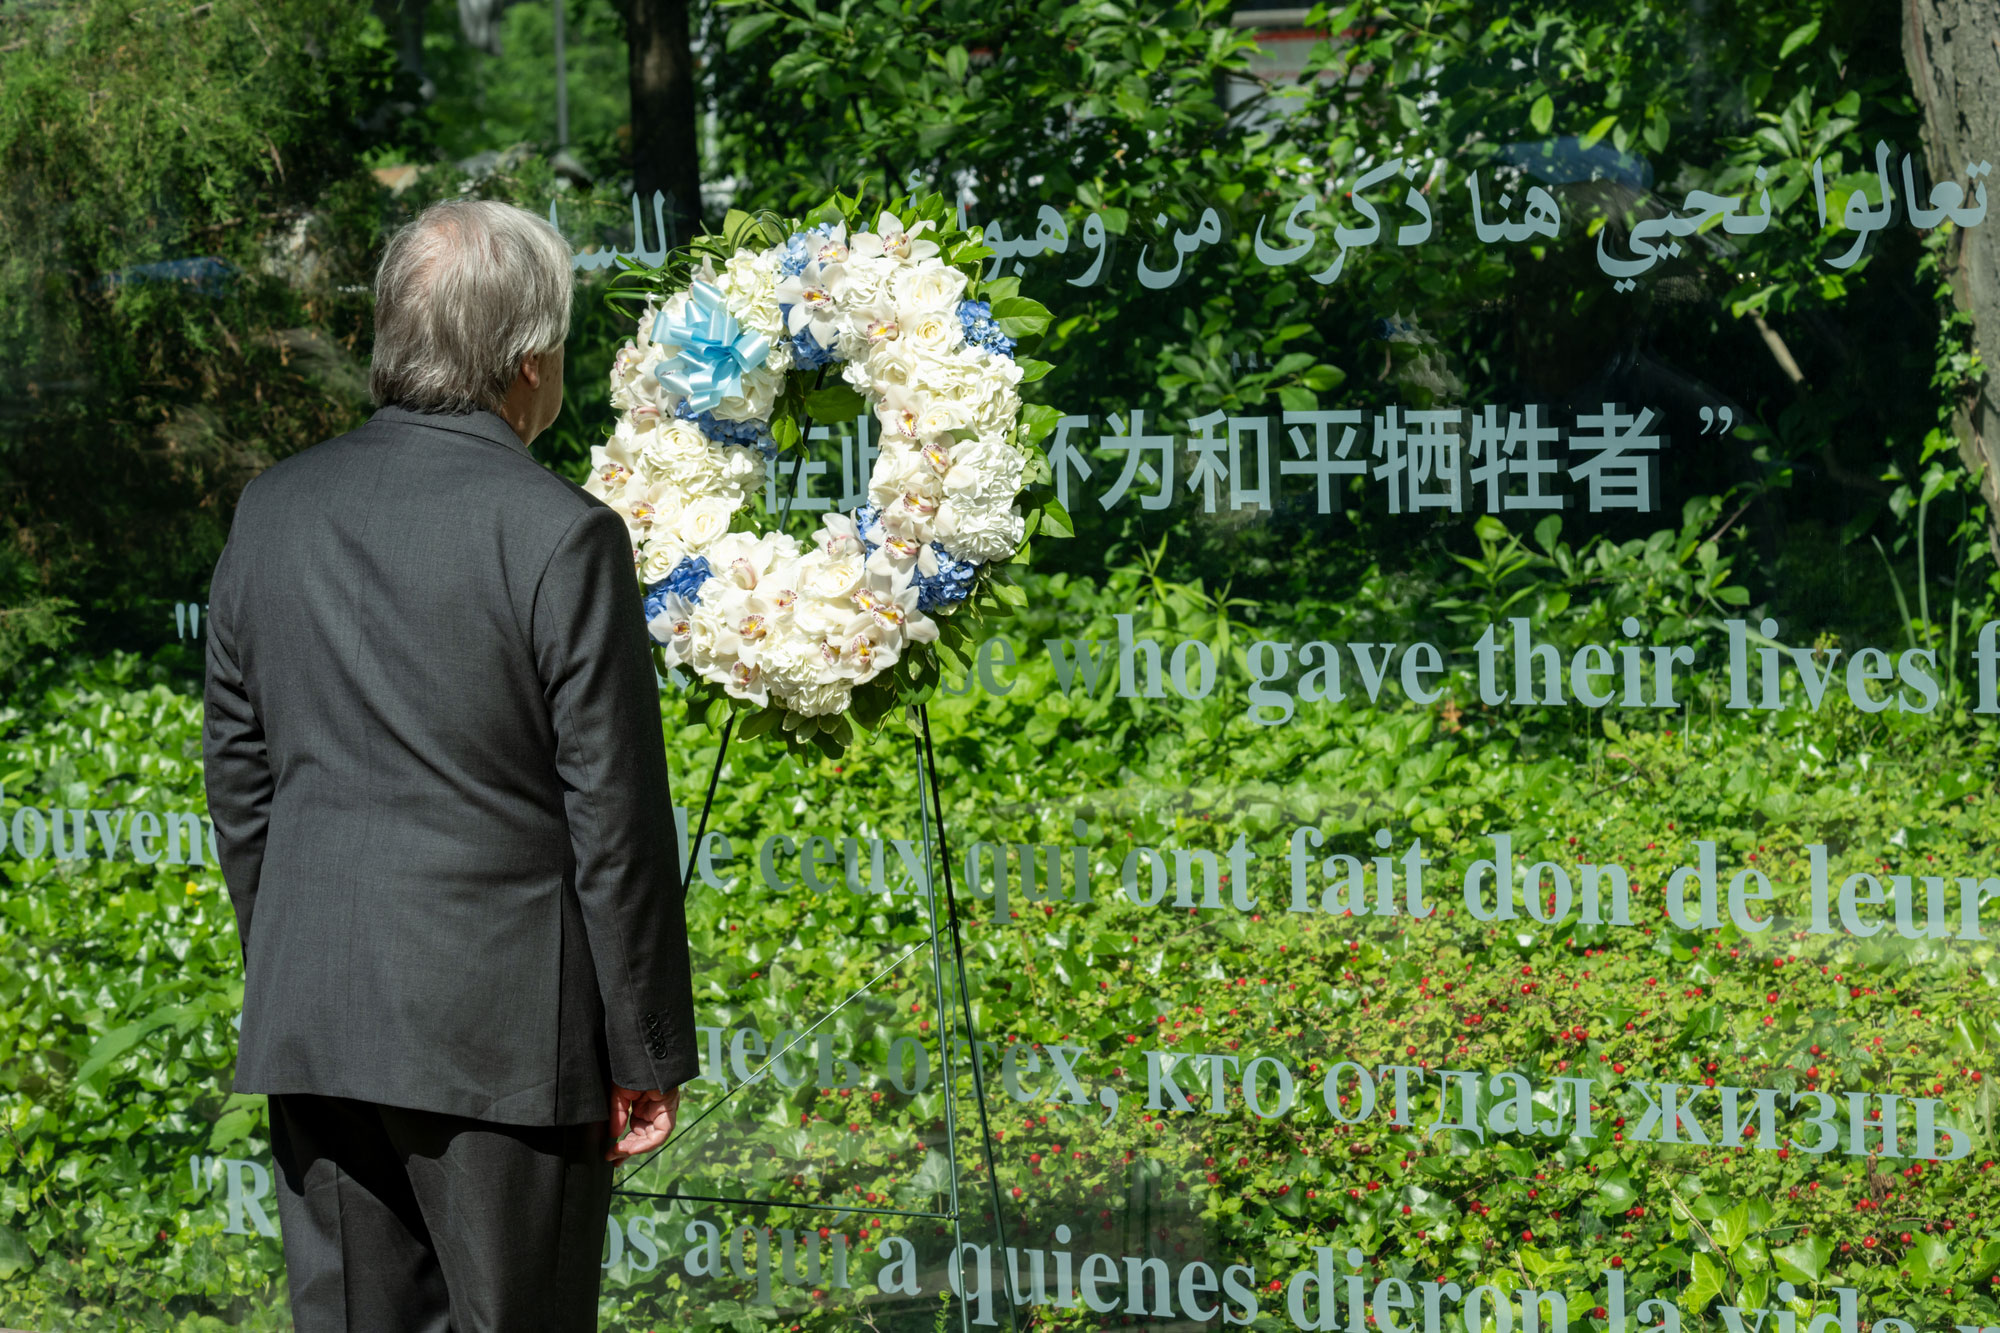 Secretary-General António Guterres attends the wreath laying ceremony in honour of fallen Peacekeepers at the Peacekeeping Memorial at UN Headquarters. UN Photo/Mark Garten